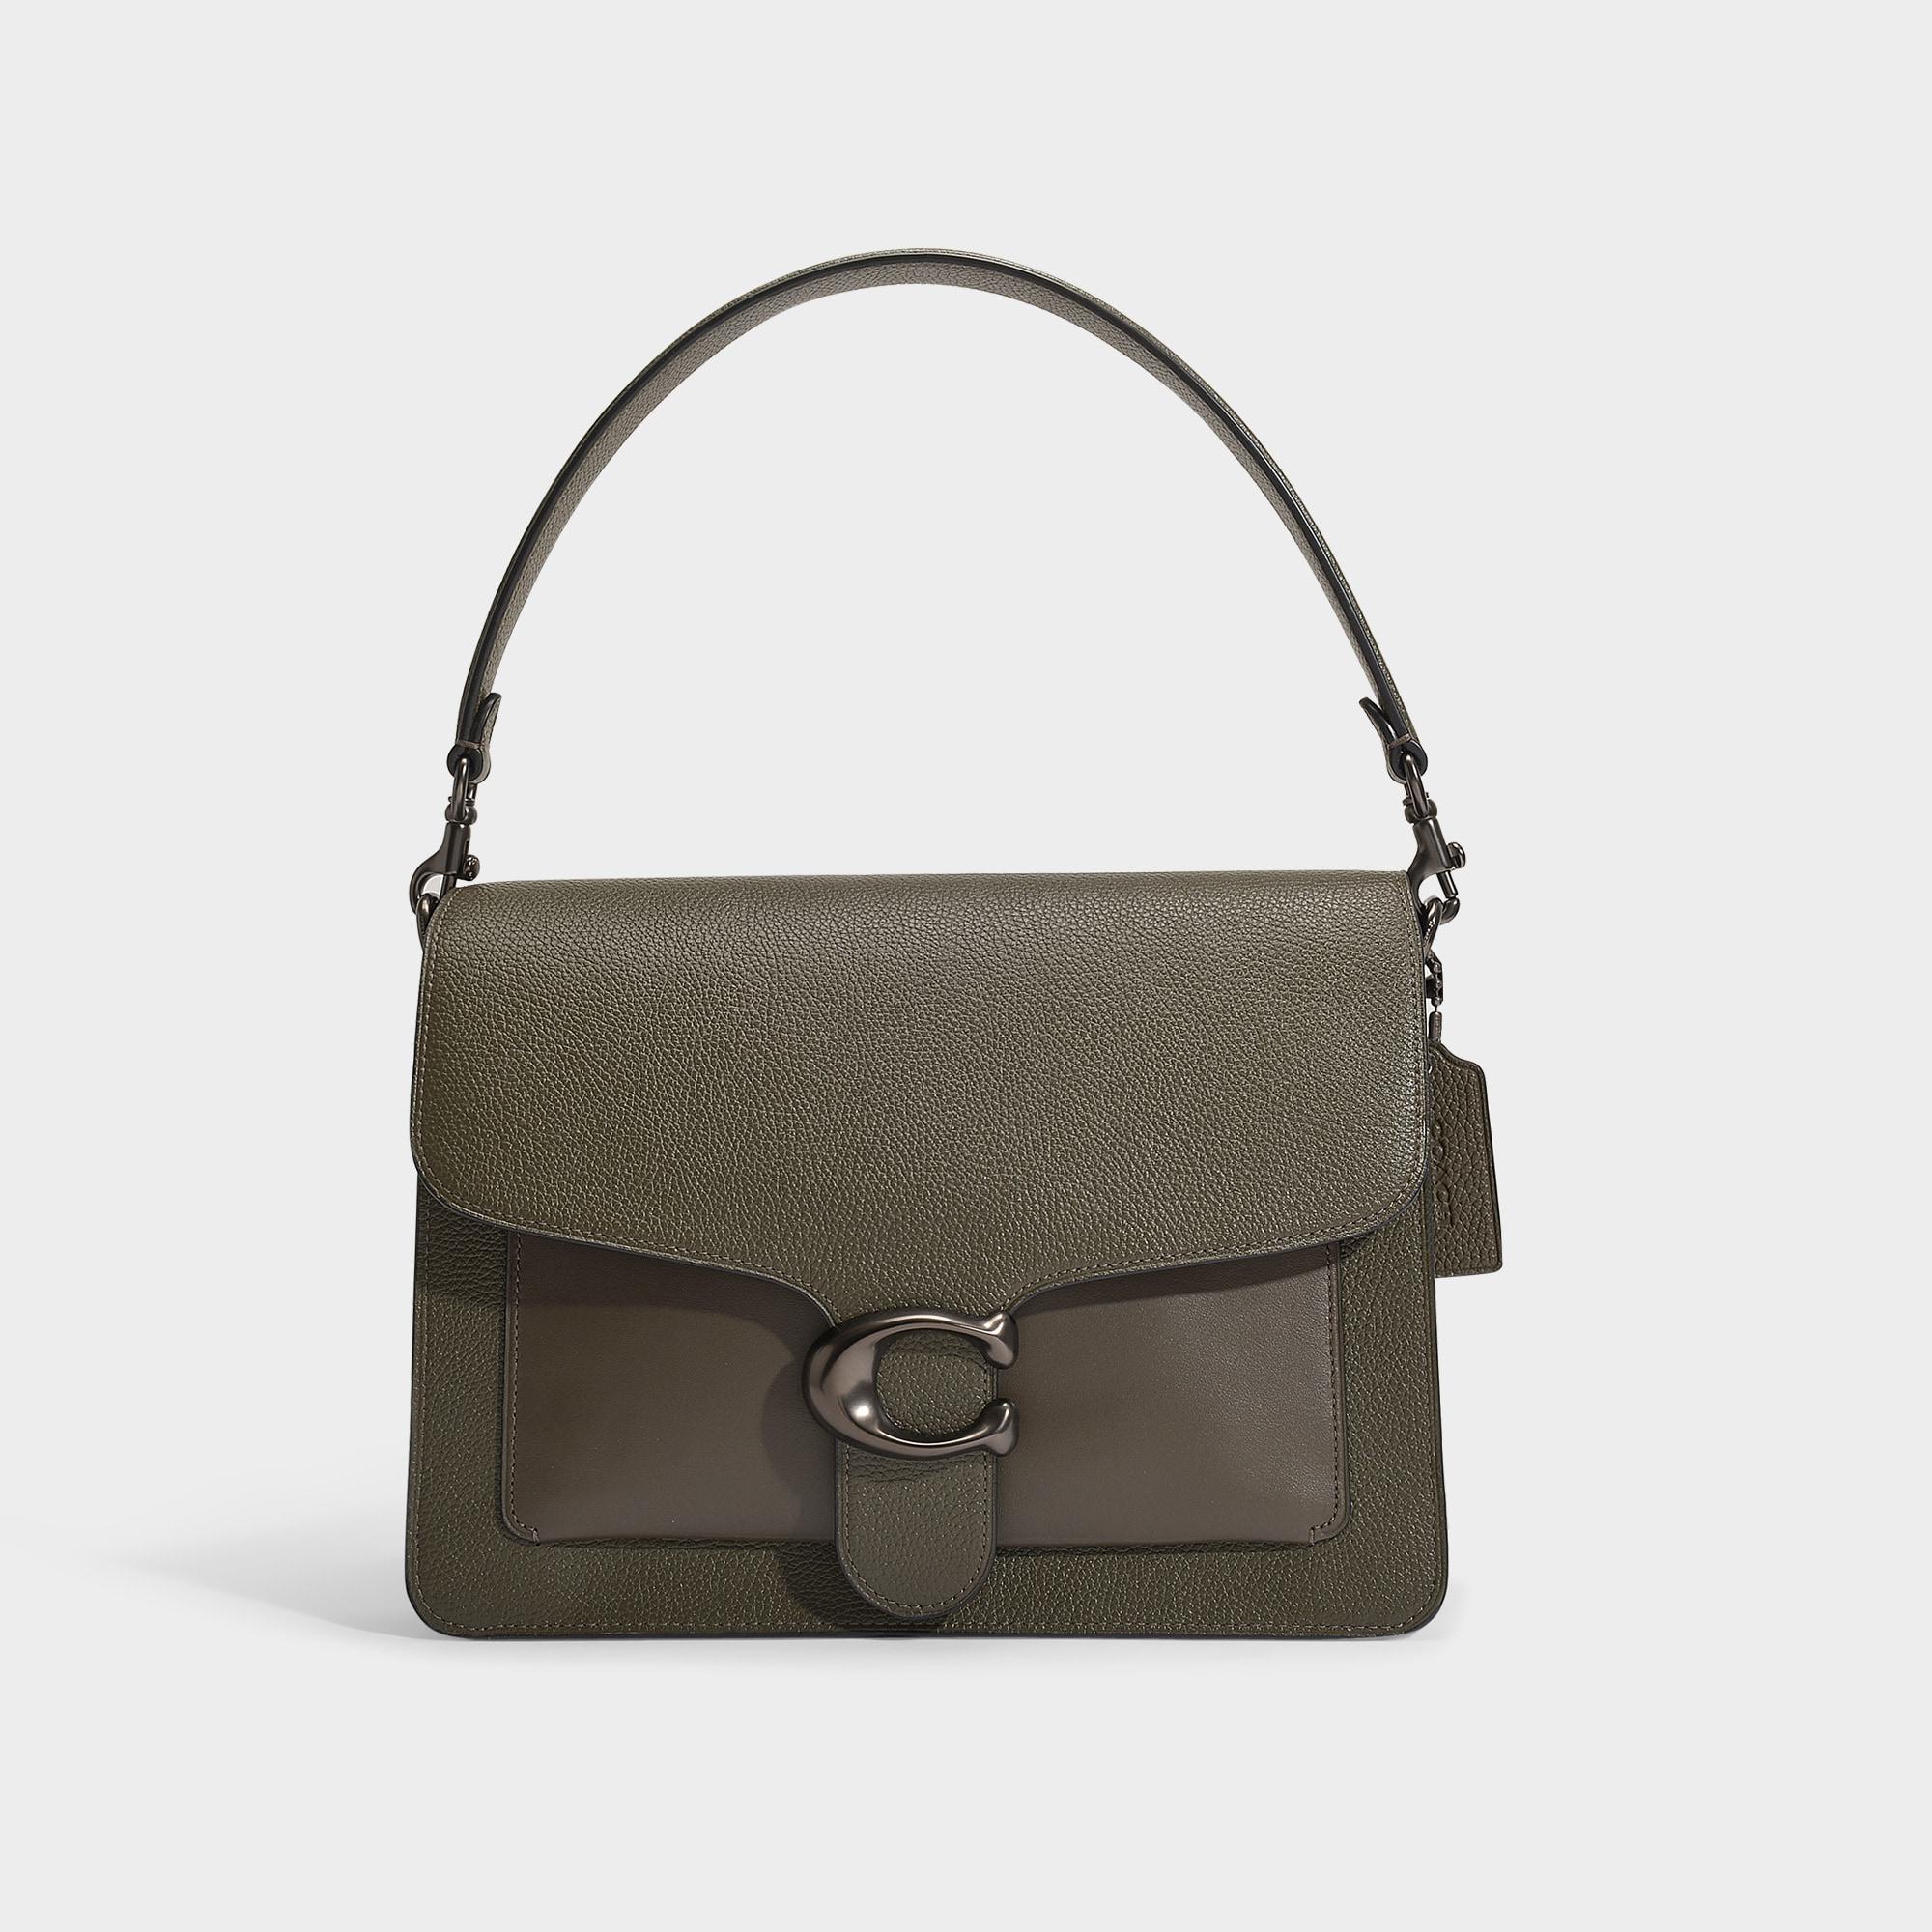 COACH Large Tabby Bag In Green Mixed Leather With Polished Pebble ...